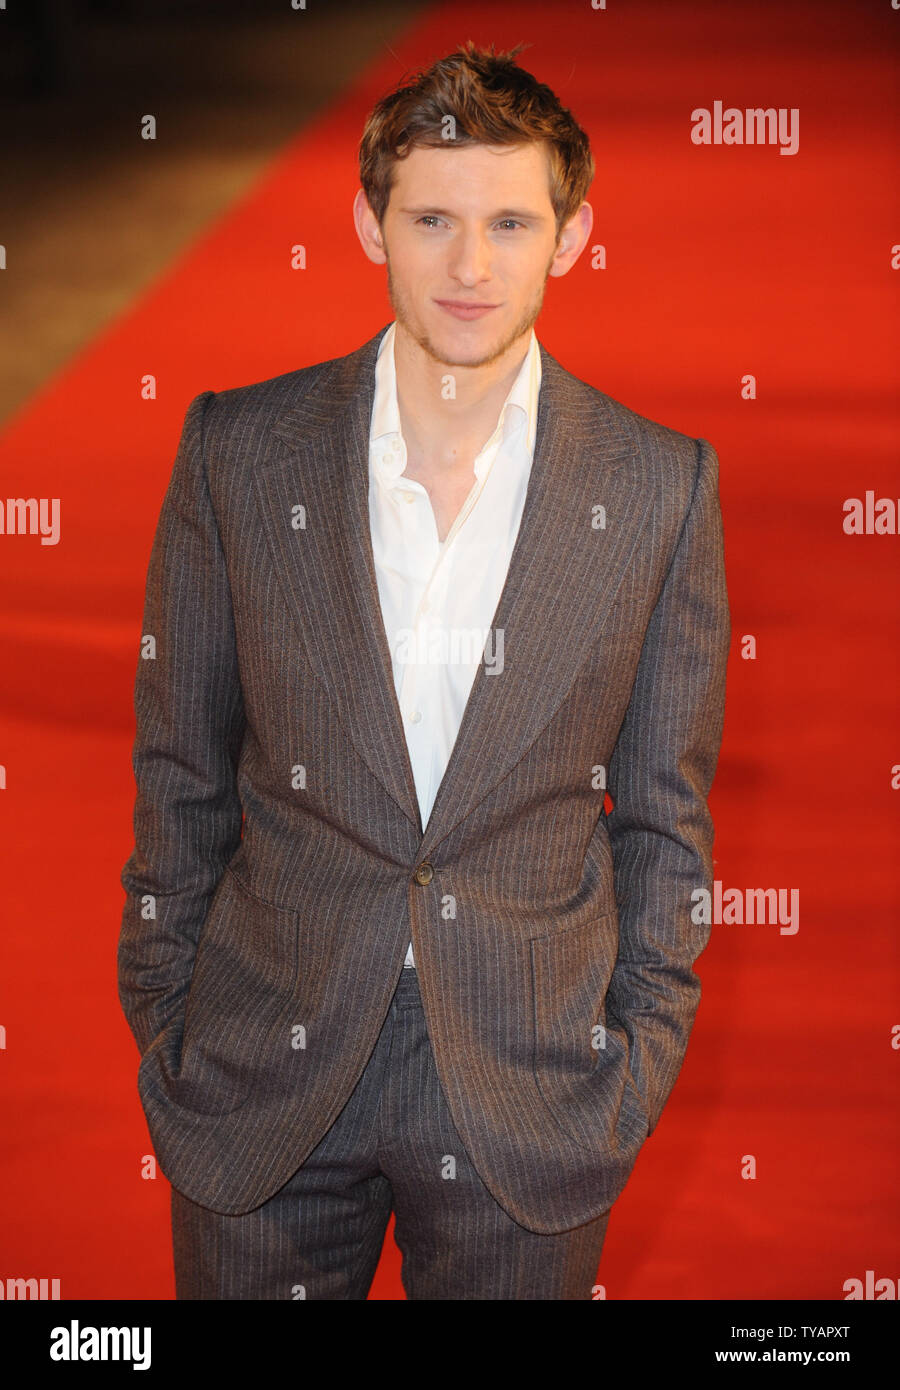 British actor Jamie Bell attends the European premiere of 'Defiance' at Odeon, Leicester Square in London on January 6, 2009.  (UPI Photo/Rune Hellestad) Stock Photo